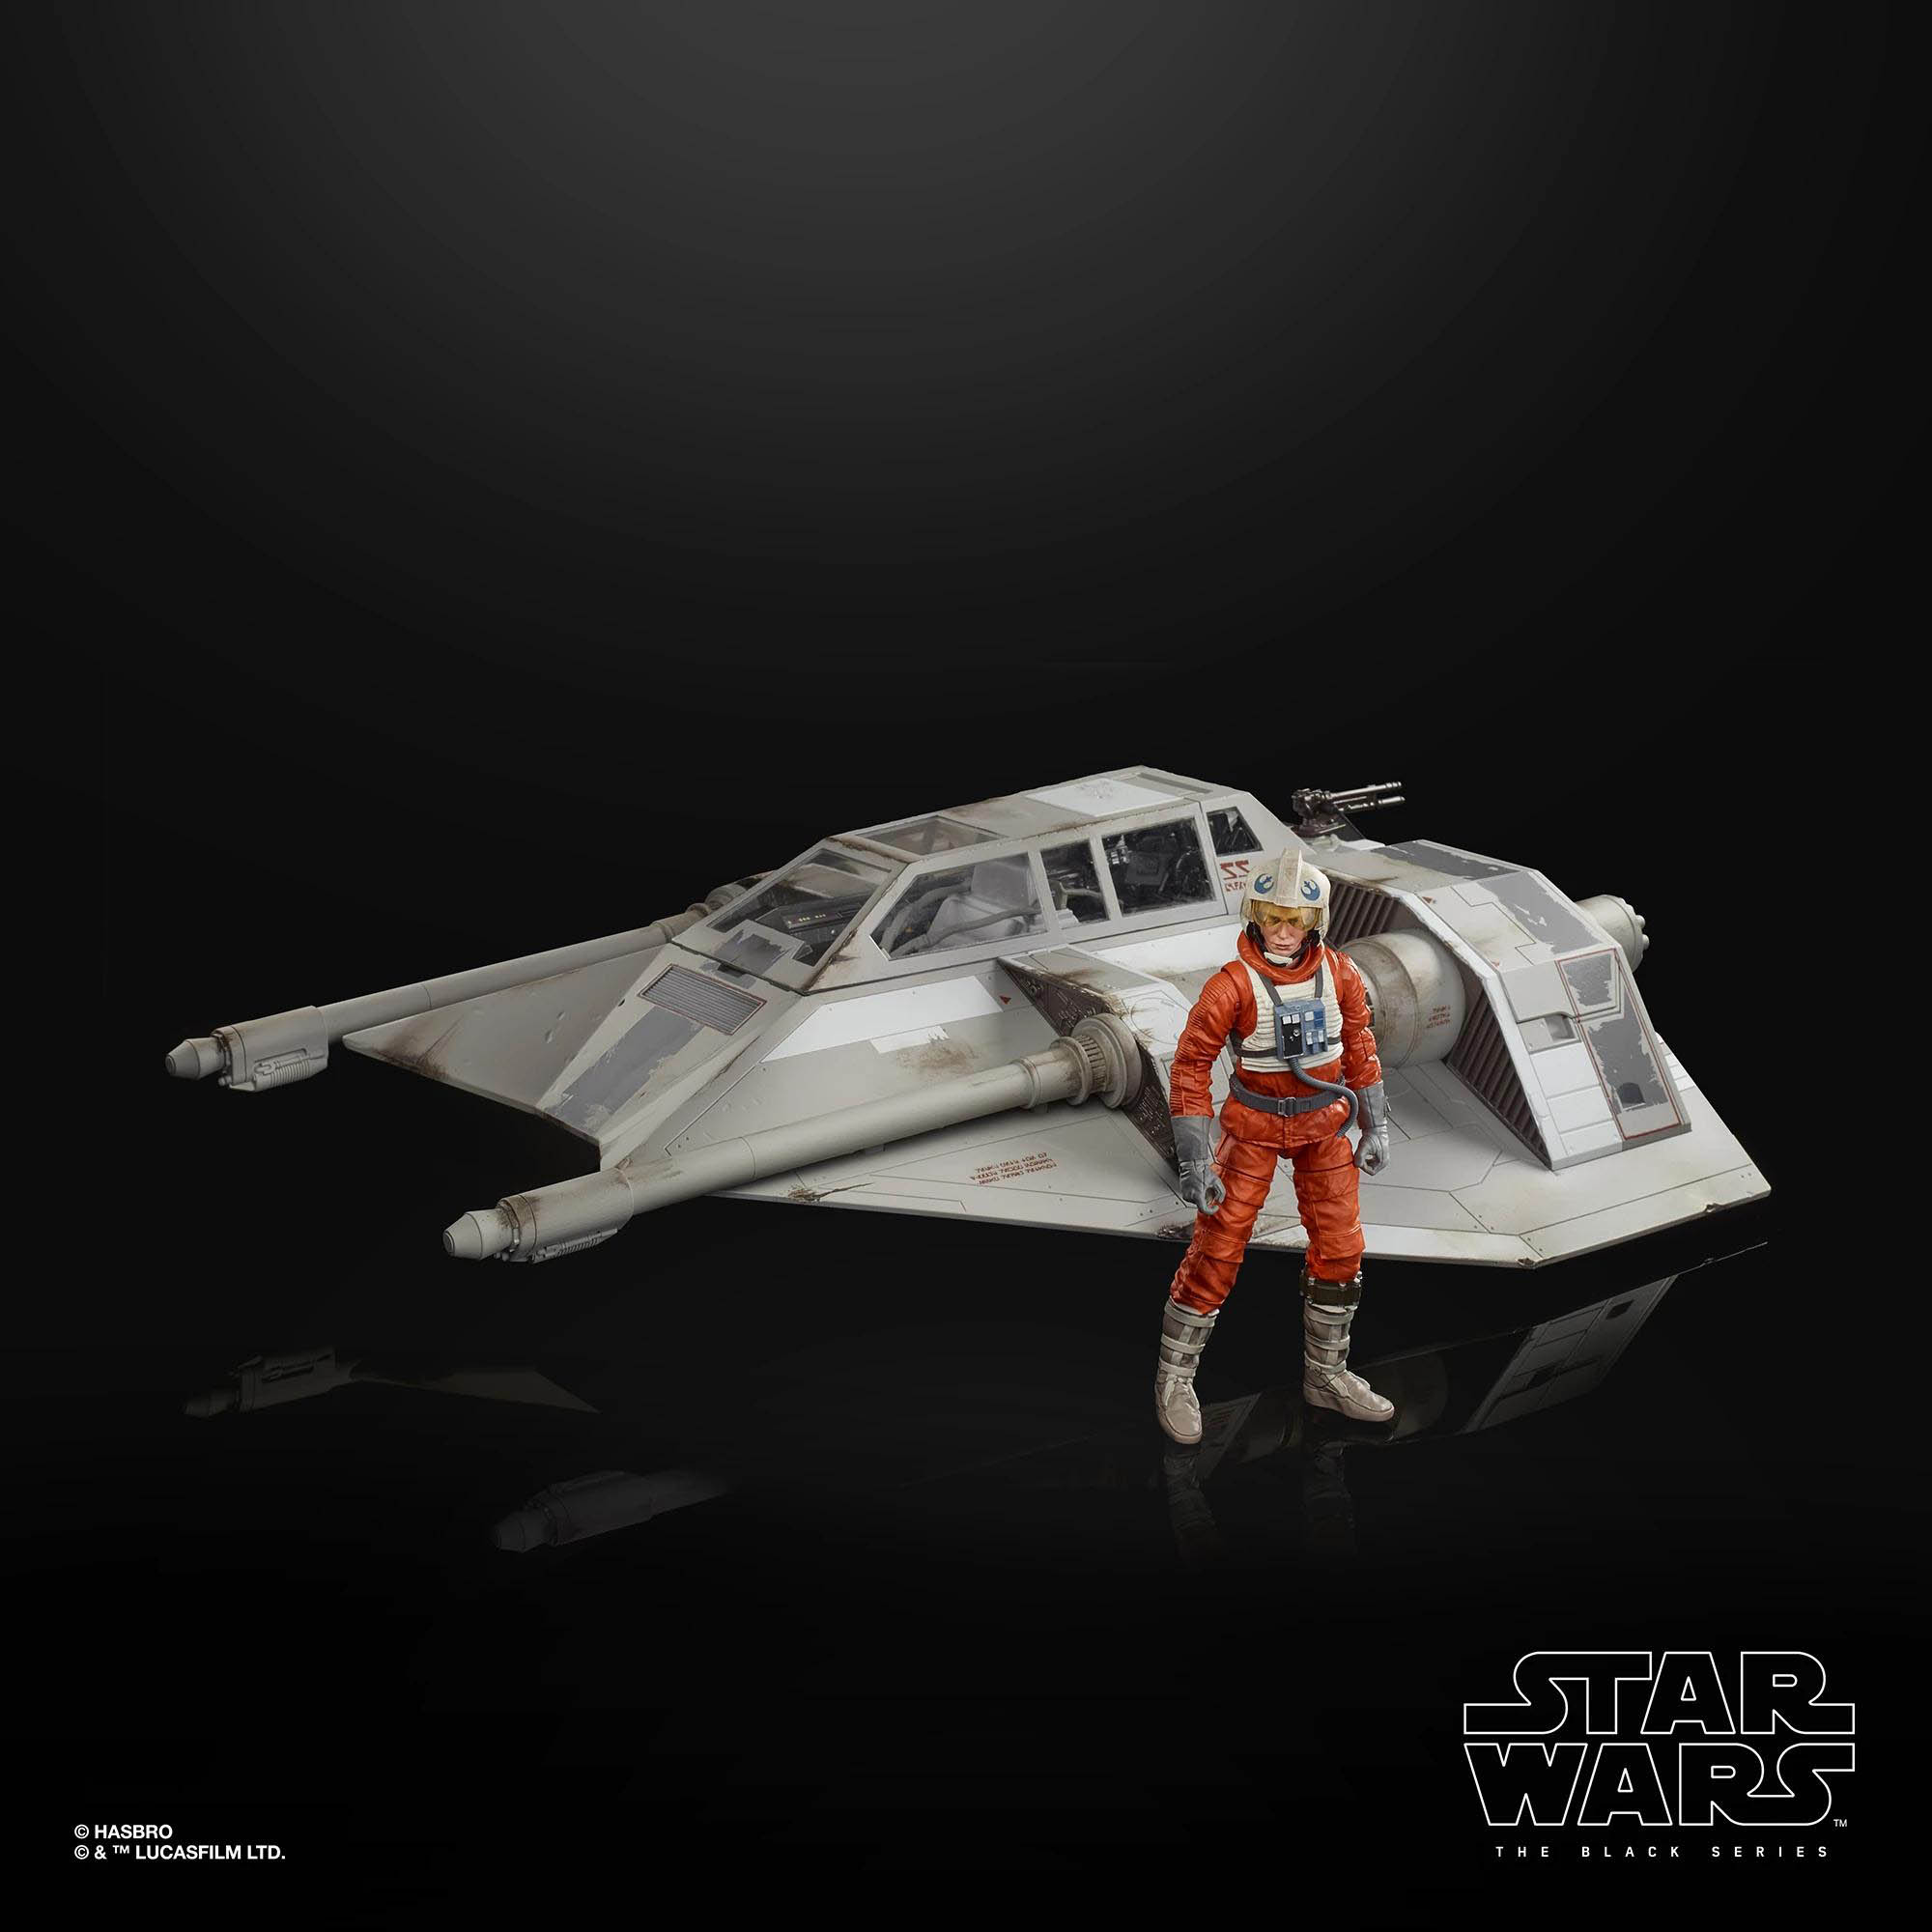 Toy Fair 2020: Hasbro Star Wars action figure and vehicle reveals